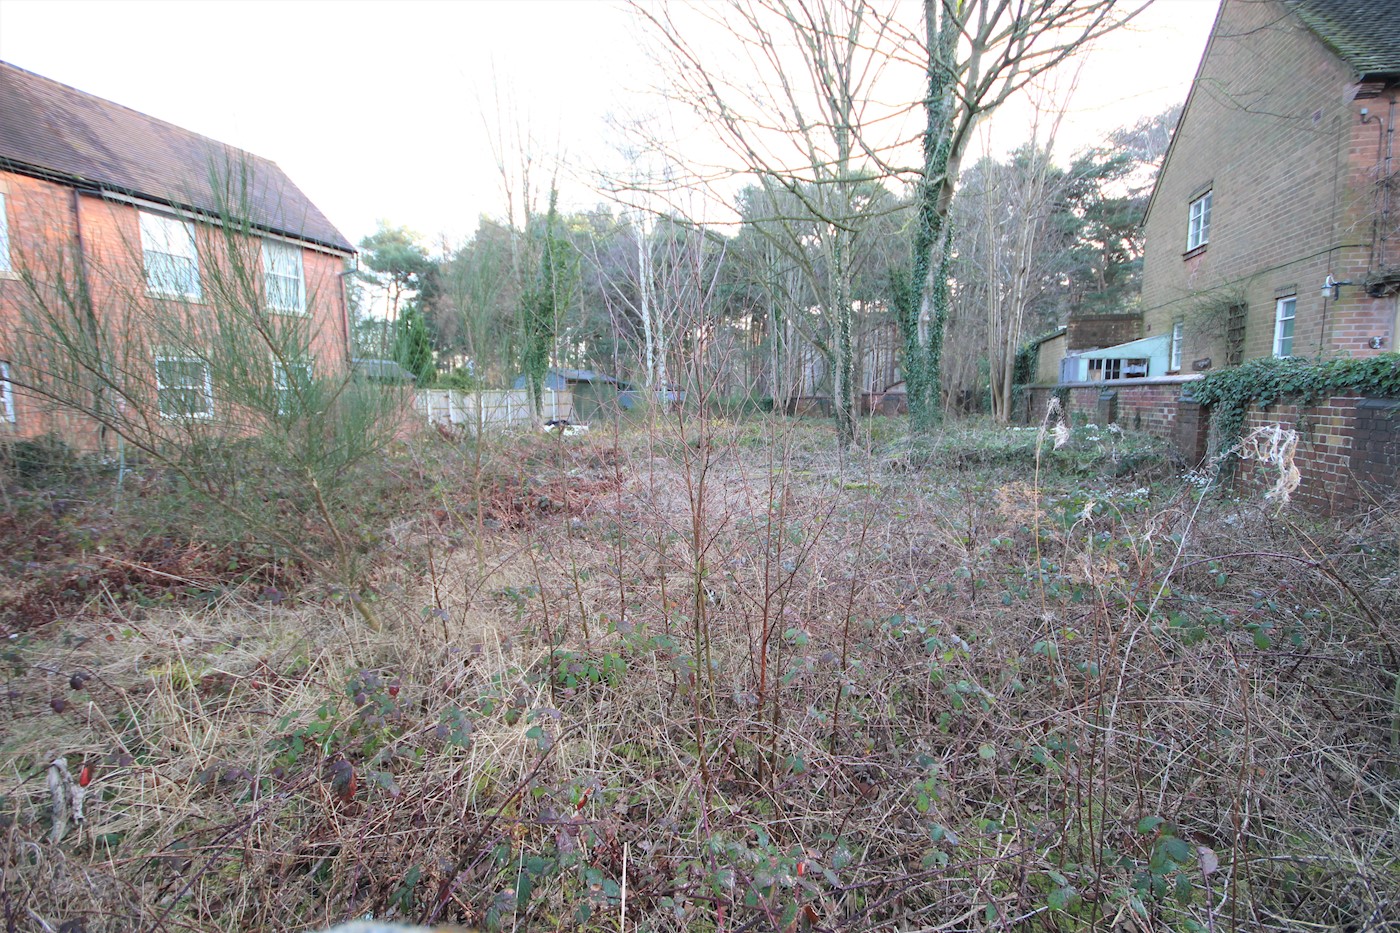 Land at Holdiford Road, Milford, Stafford, ST17 0UX 1/6